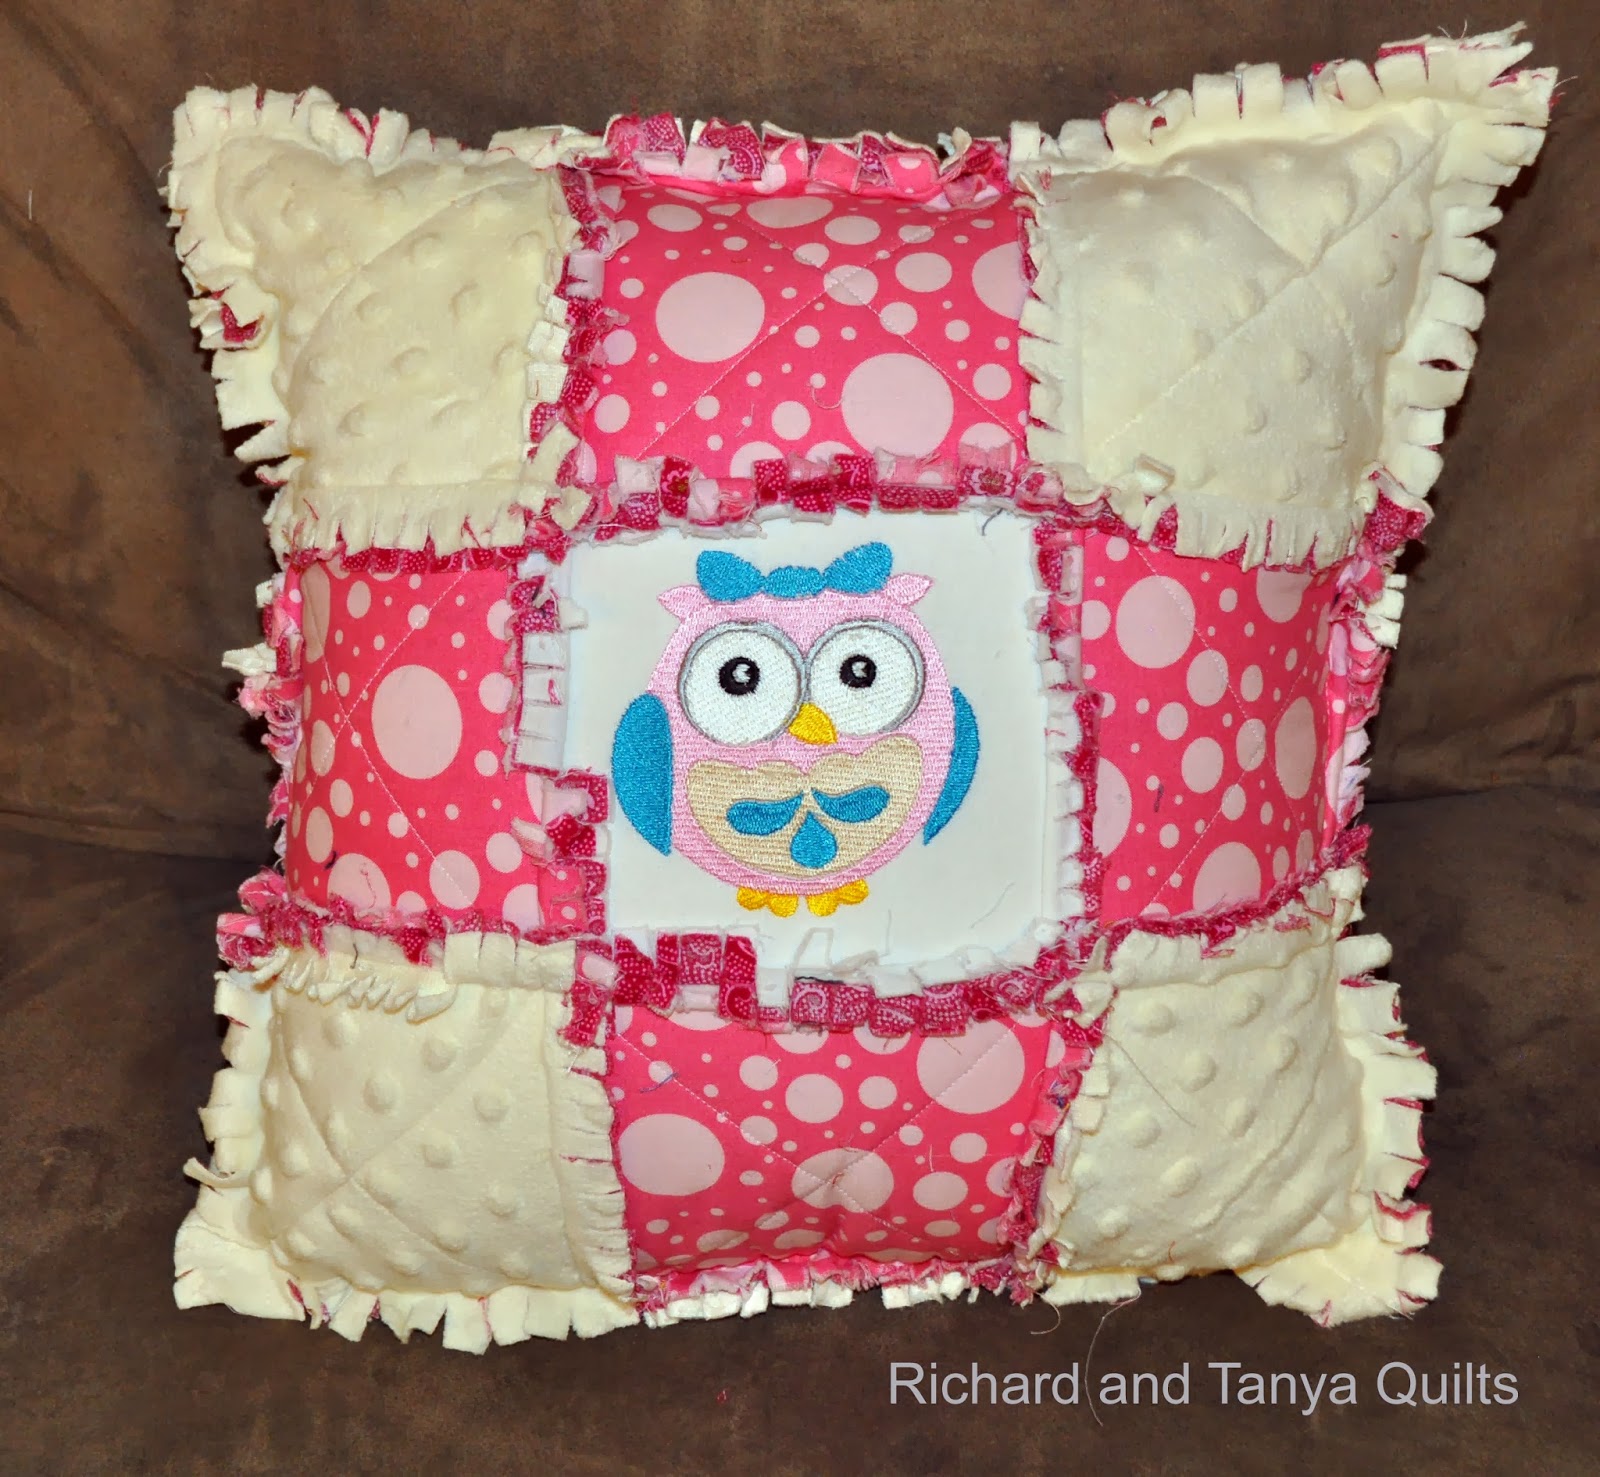 Richard and Tanya Quilts: Owl Pillow and other goodies